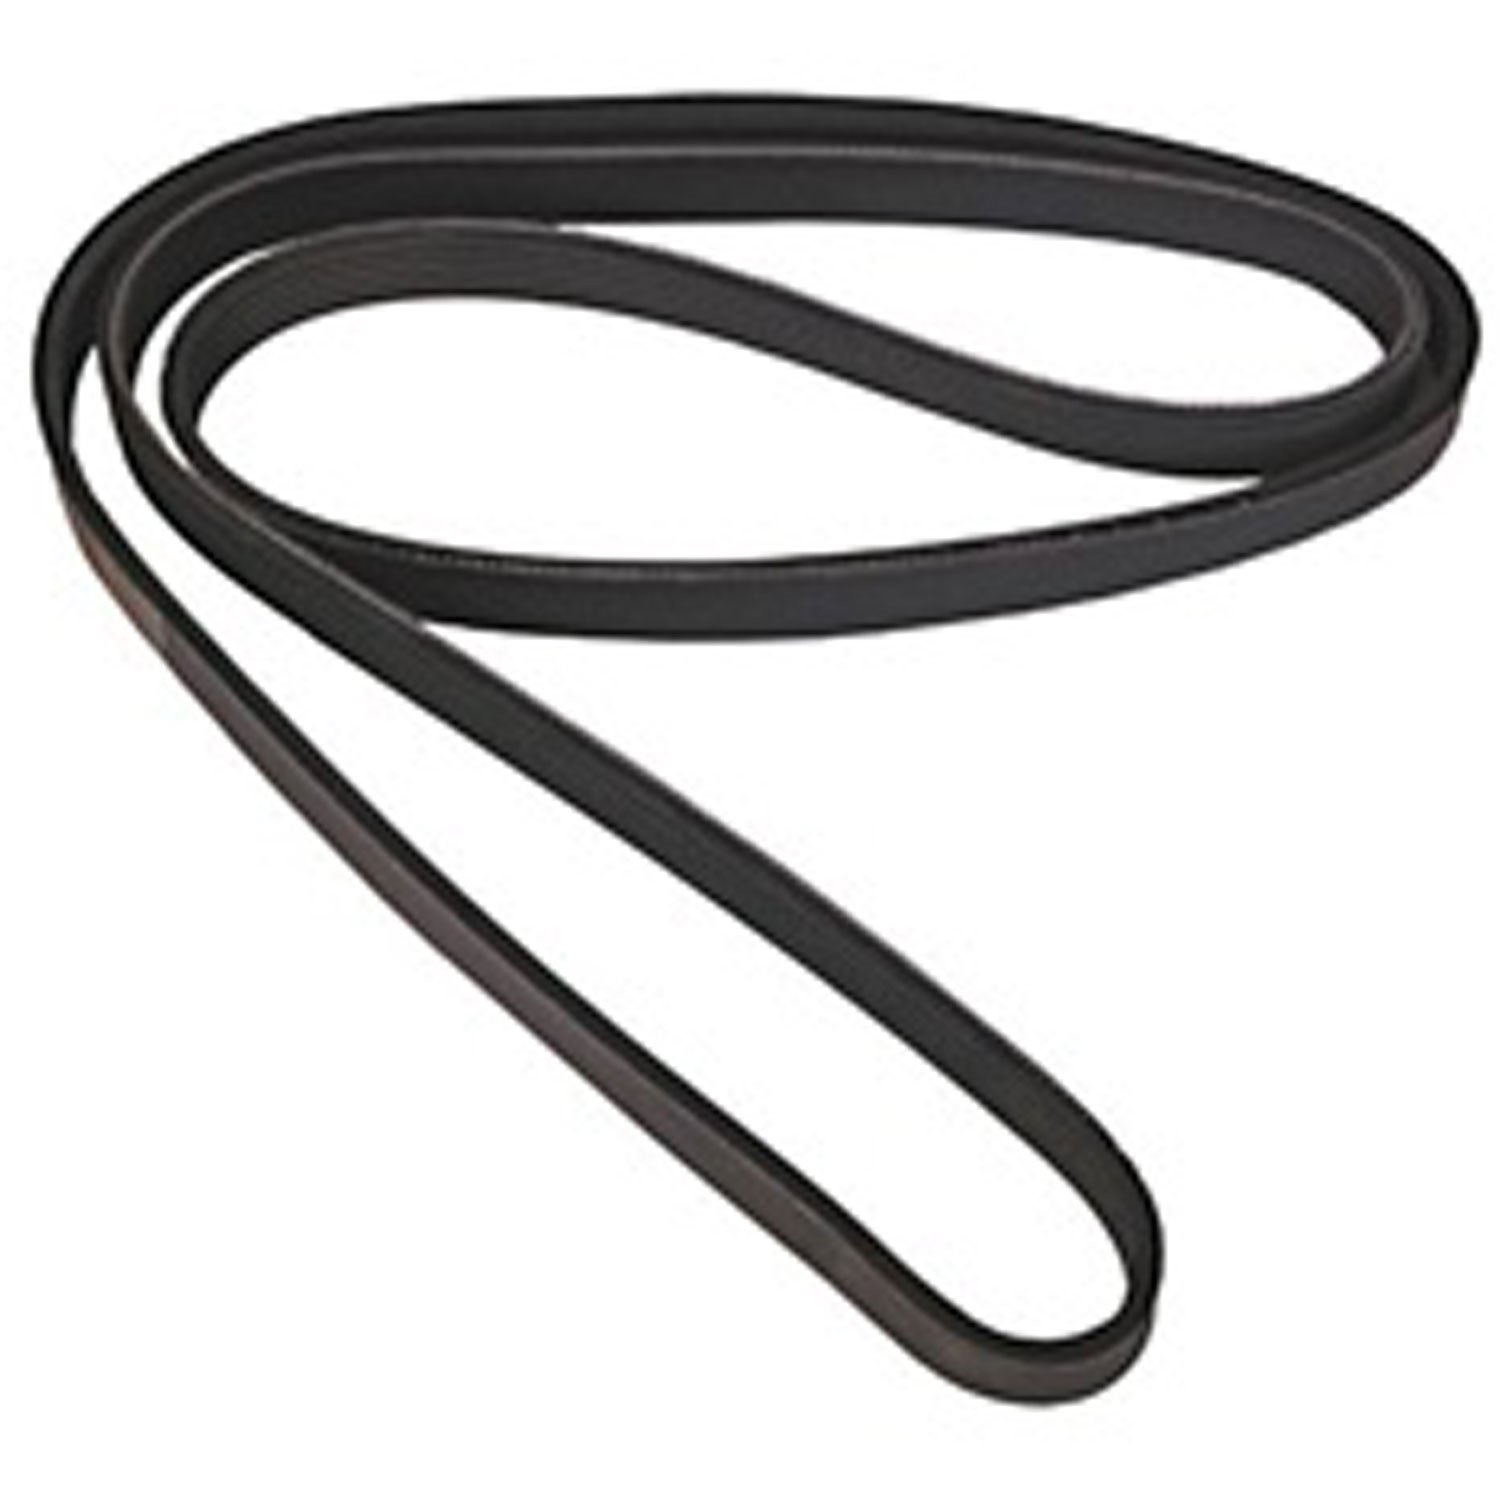 Replacement serpentine belt from Omix-ADA, Fits 87-90 Jeep Cherokee XJ with 2.5 liter engine